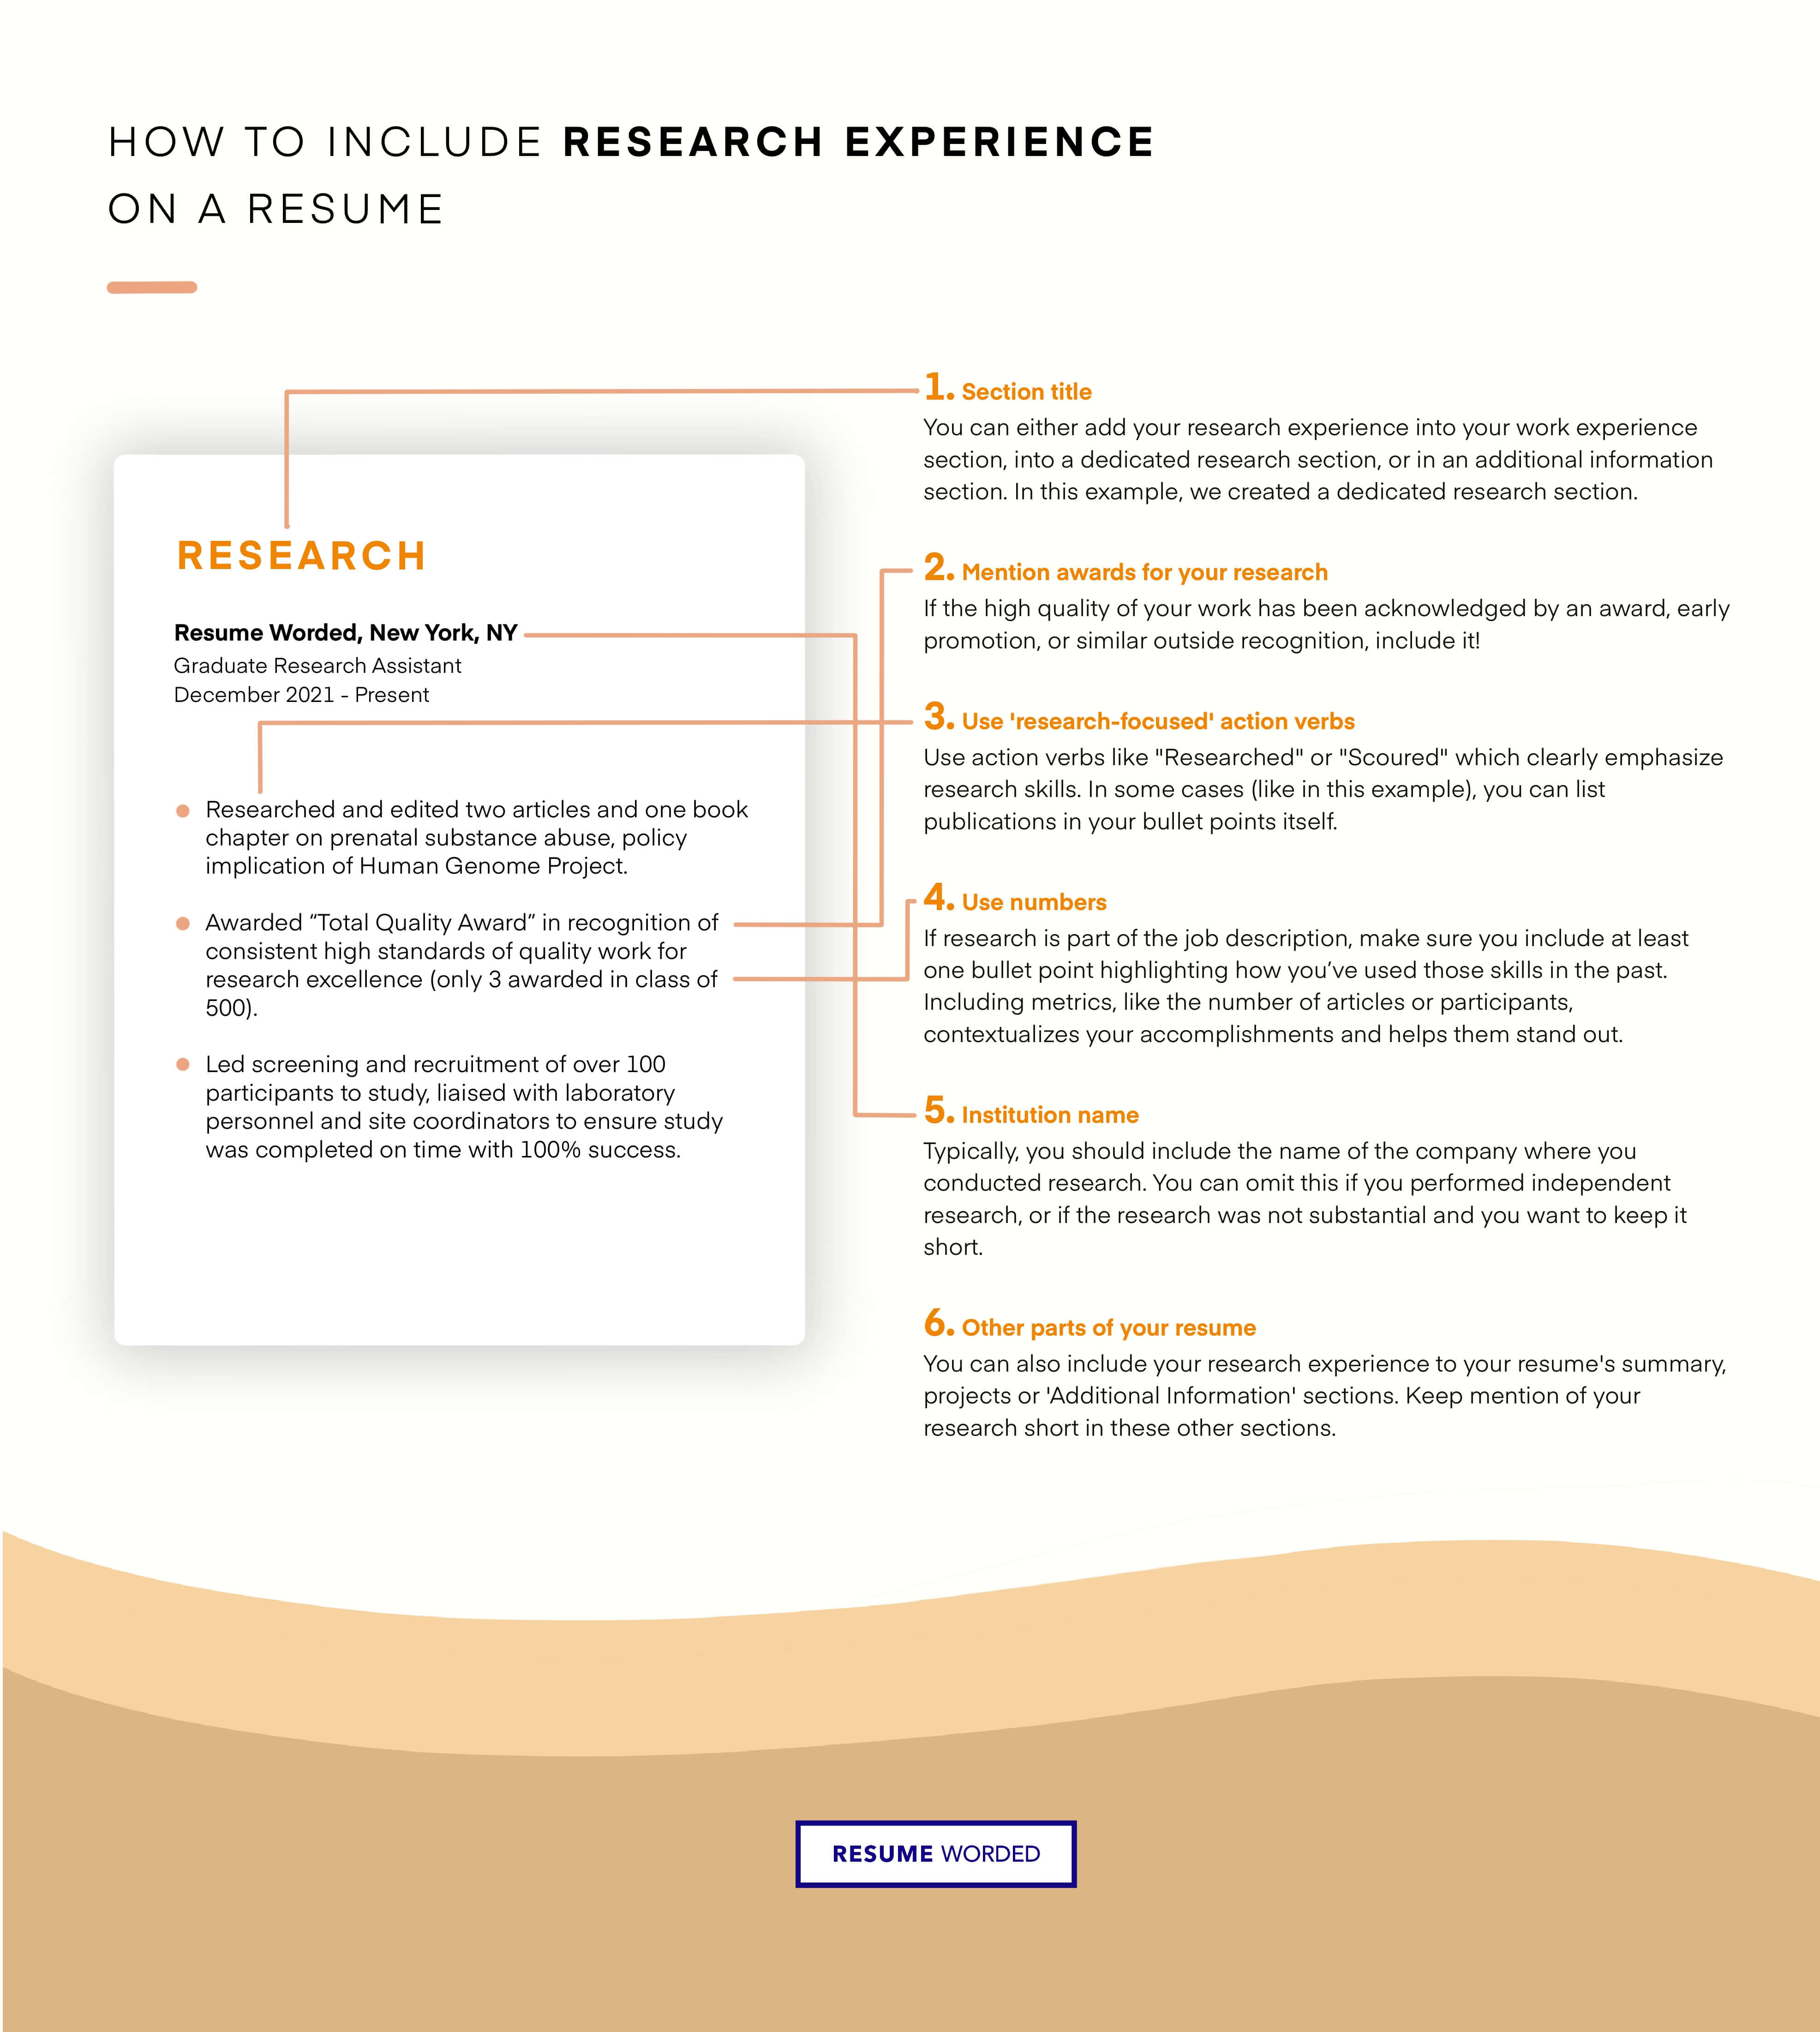 Demonstrate your research skills. - Retail Buyer  Resume